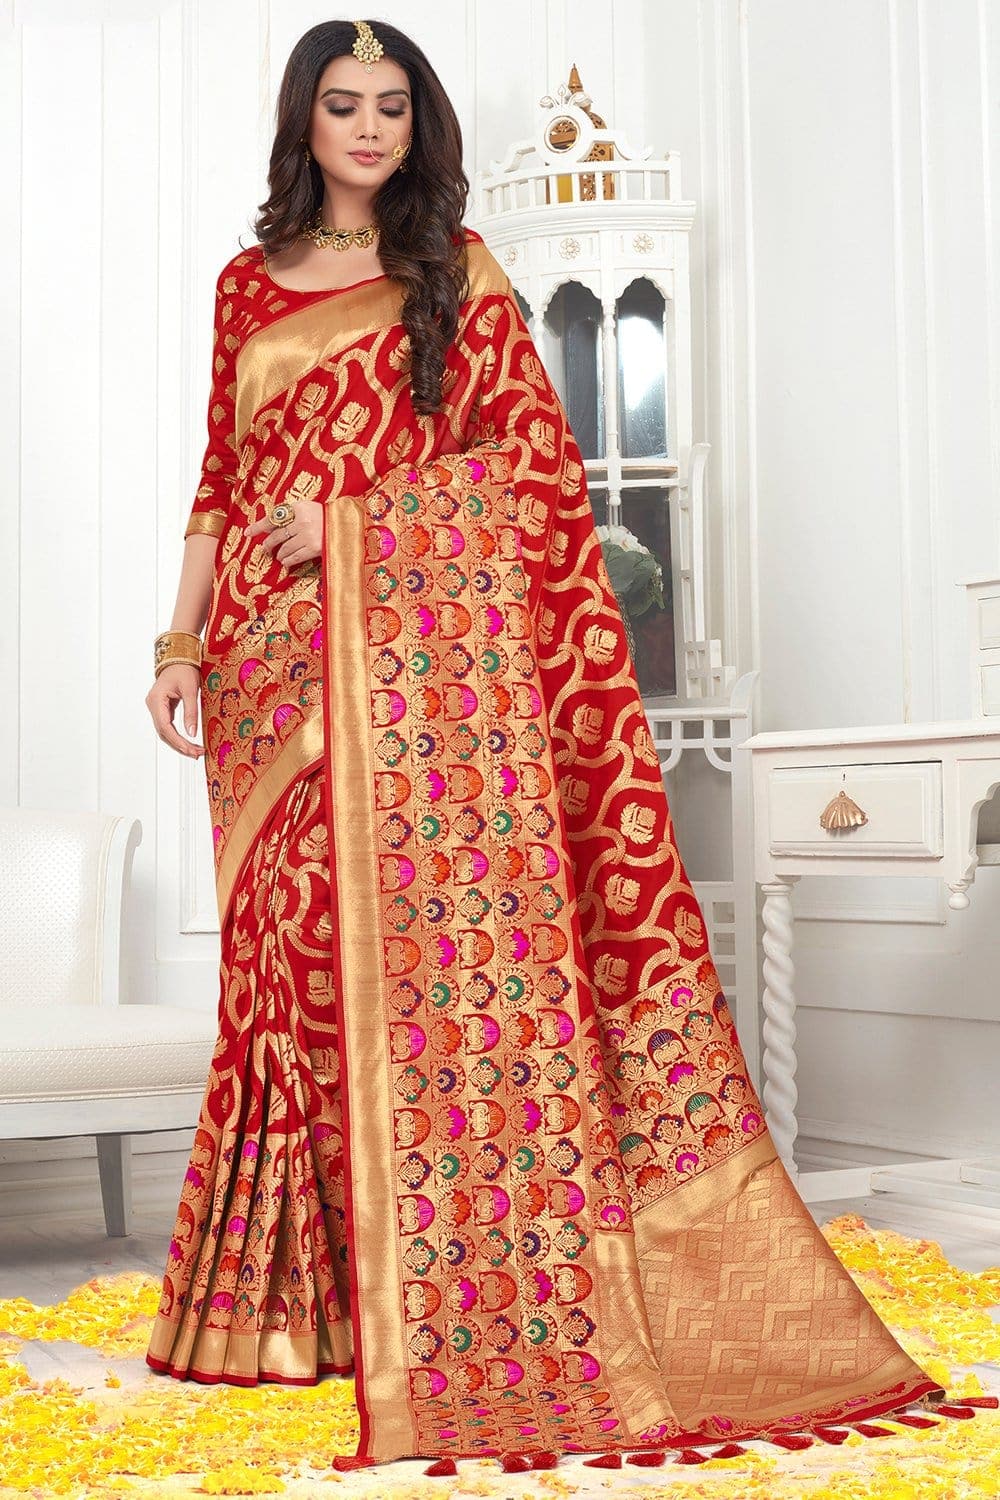 Beautiful pomegranate red banarasi  saree - From Wedding sutra collection - Buy online on Karagiri - Free shipping to USA